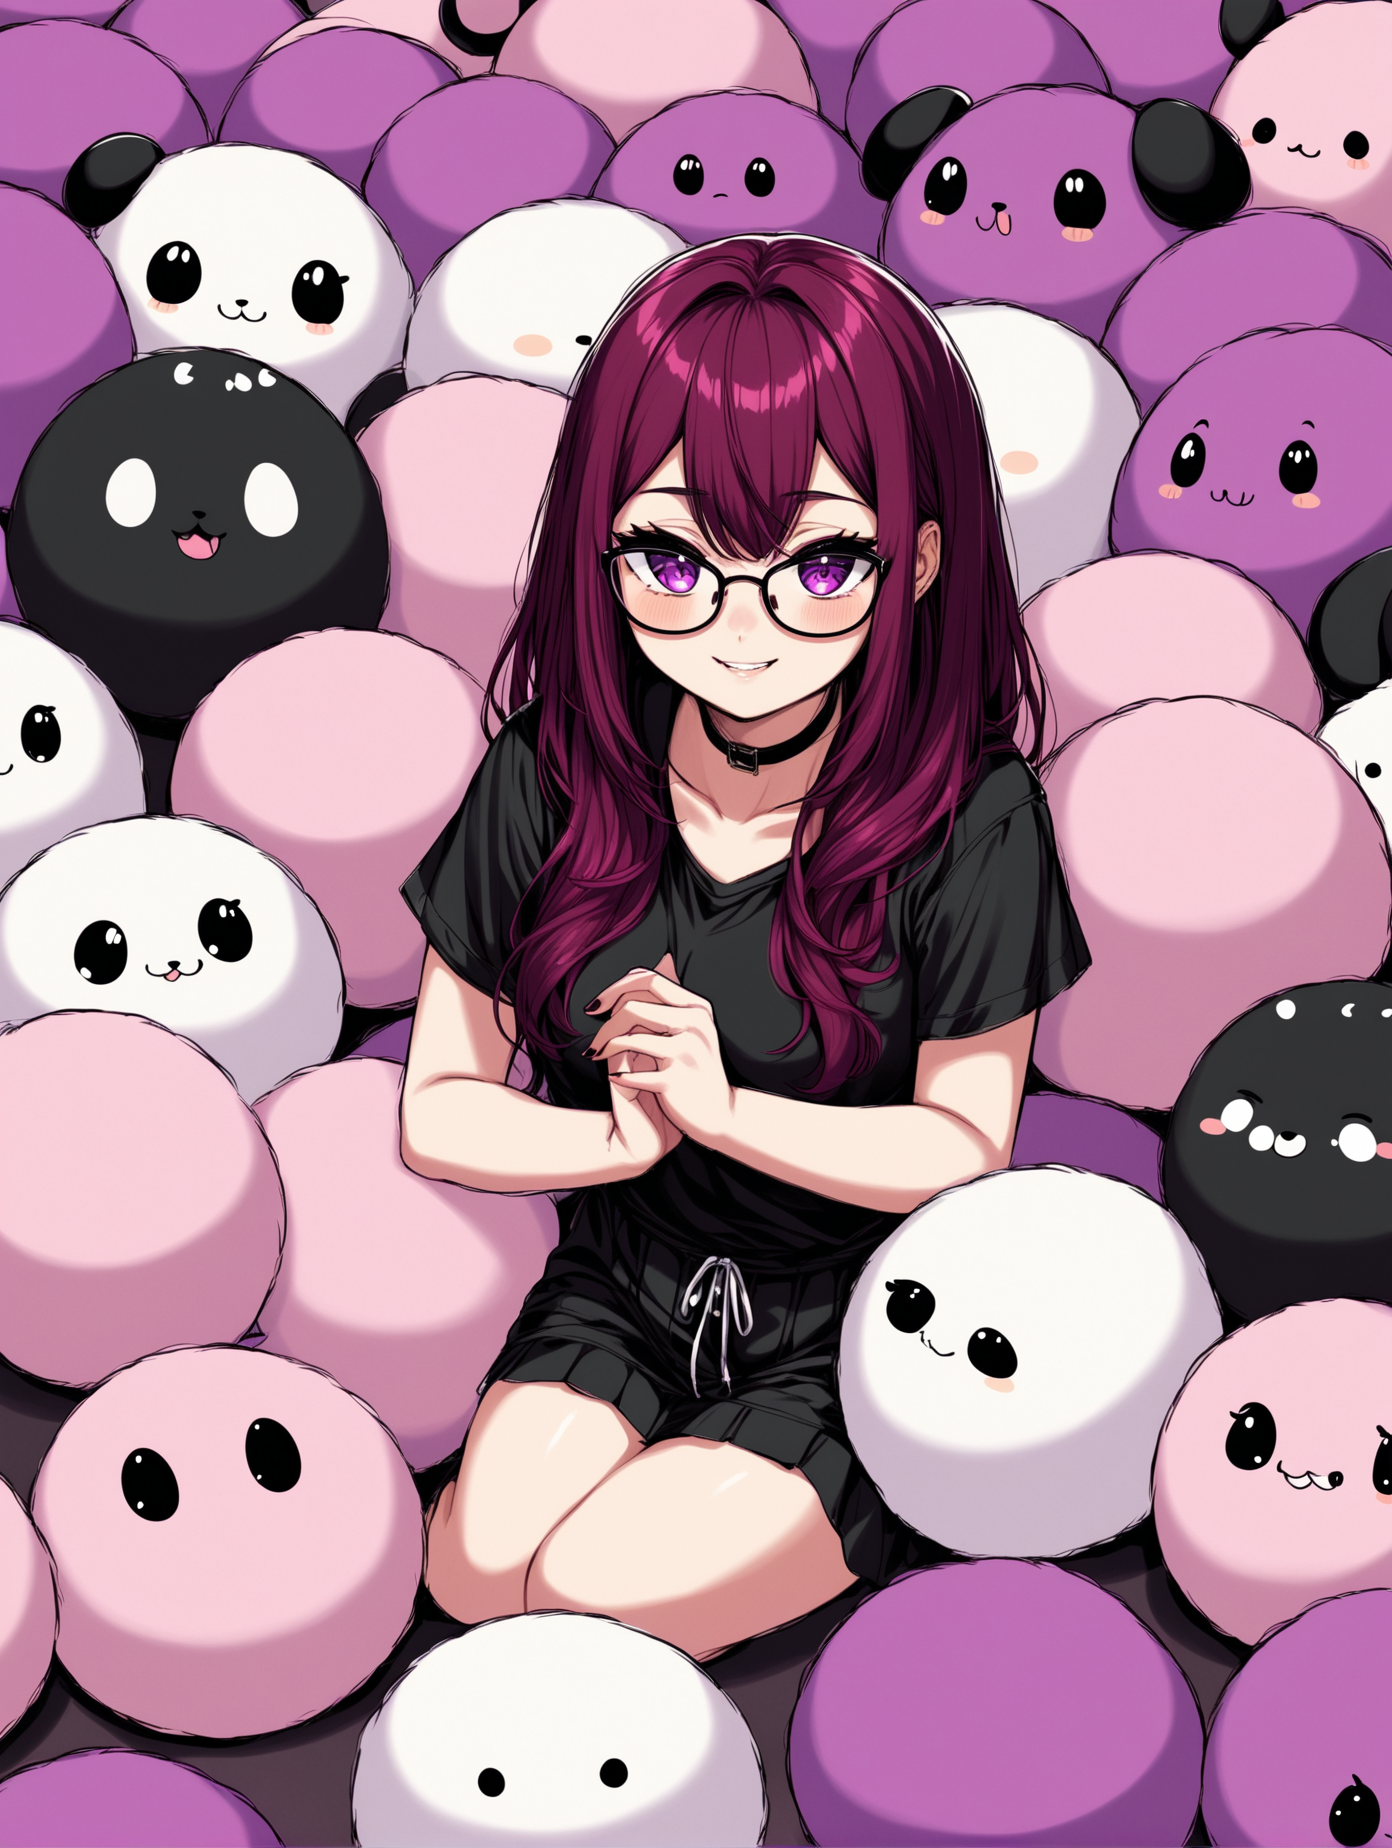 Goth nerdy anime girl with burgundy hair, surrounded by Squishmallows